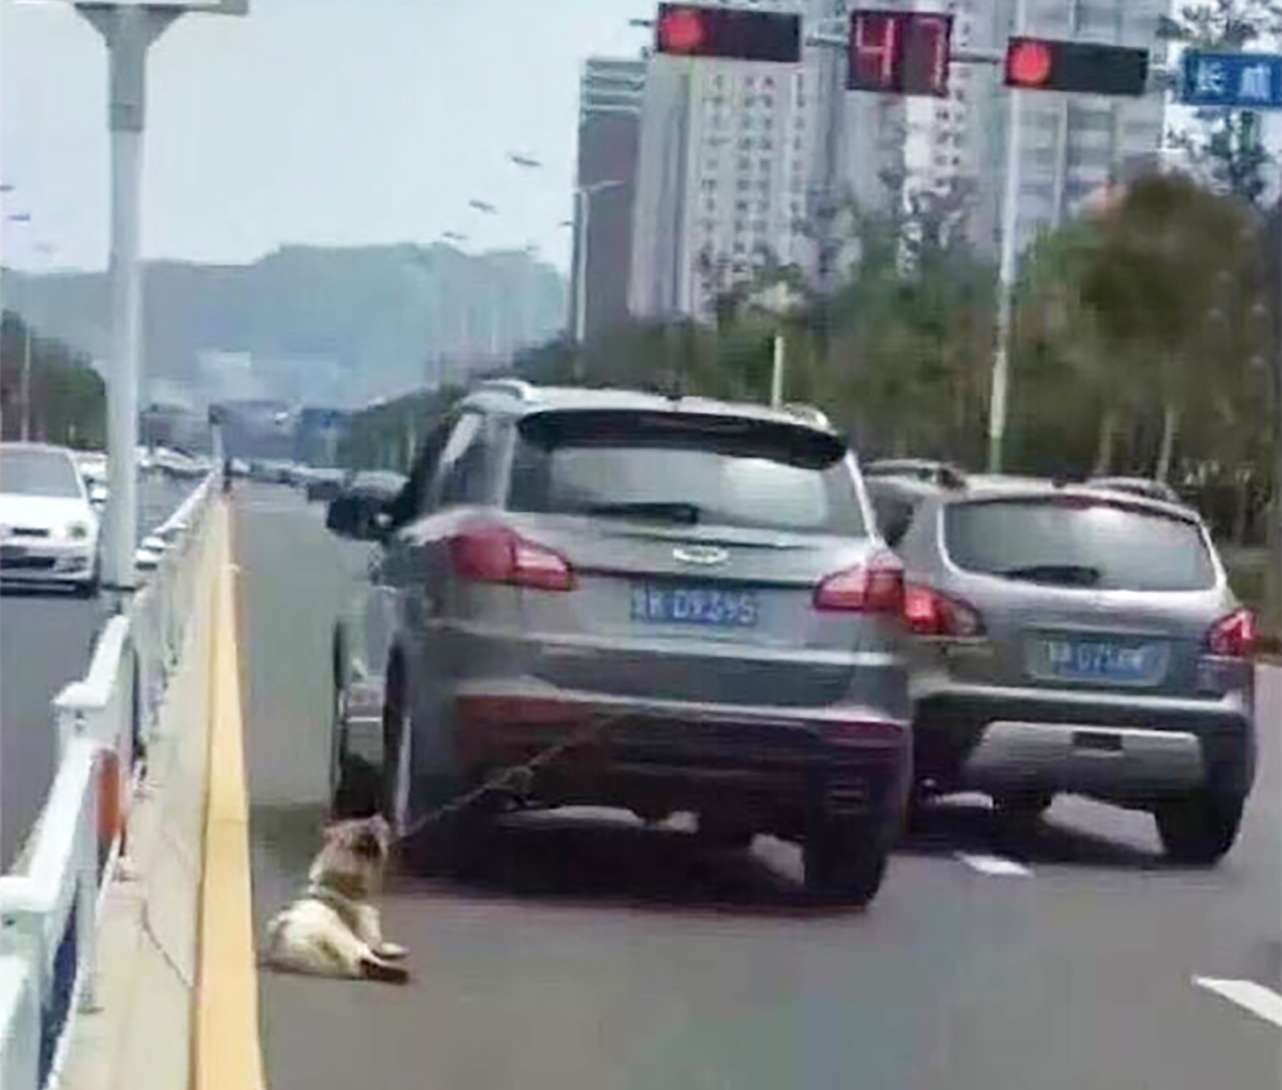 A dog is dragged along the road tied to a vehicle. SCMP Pictures